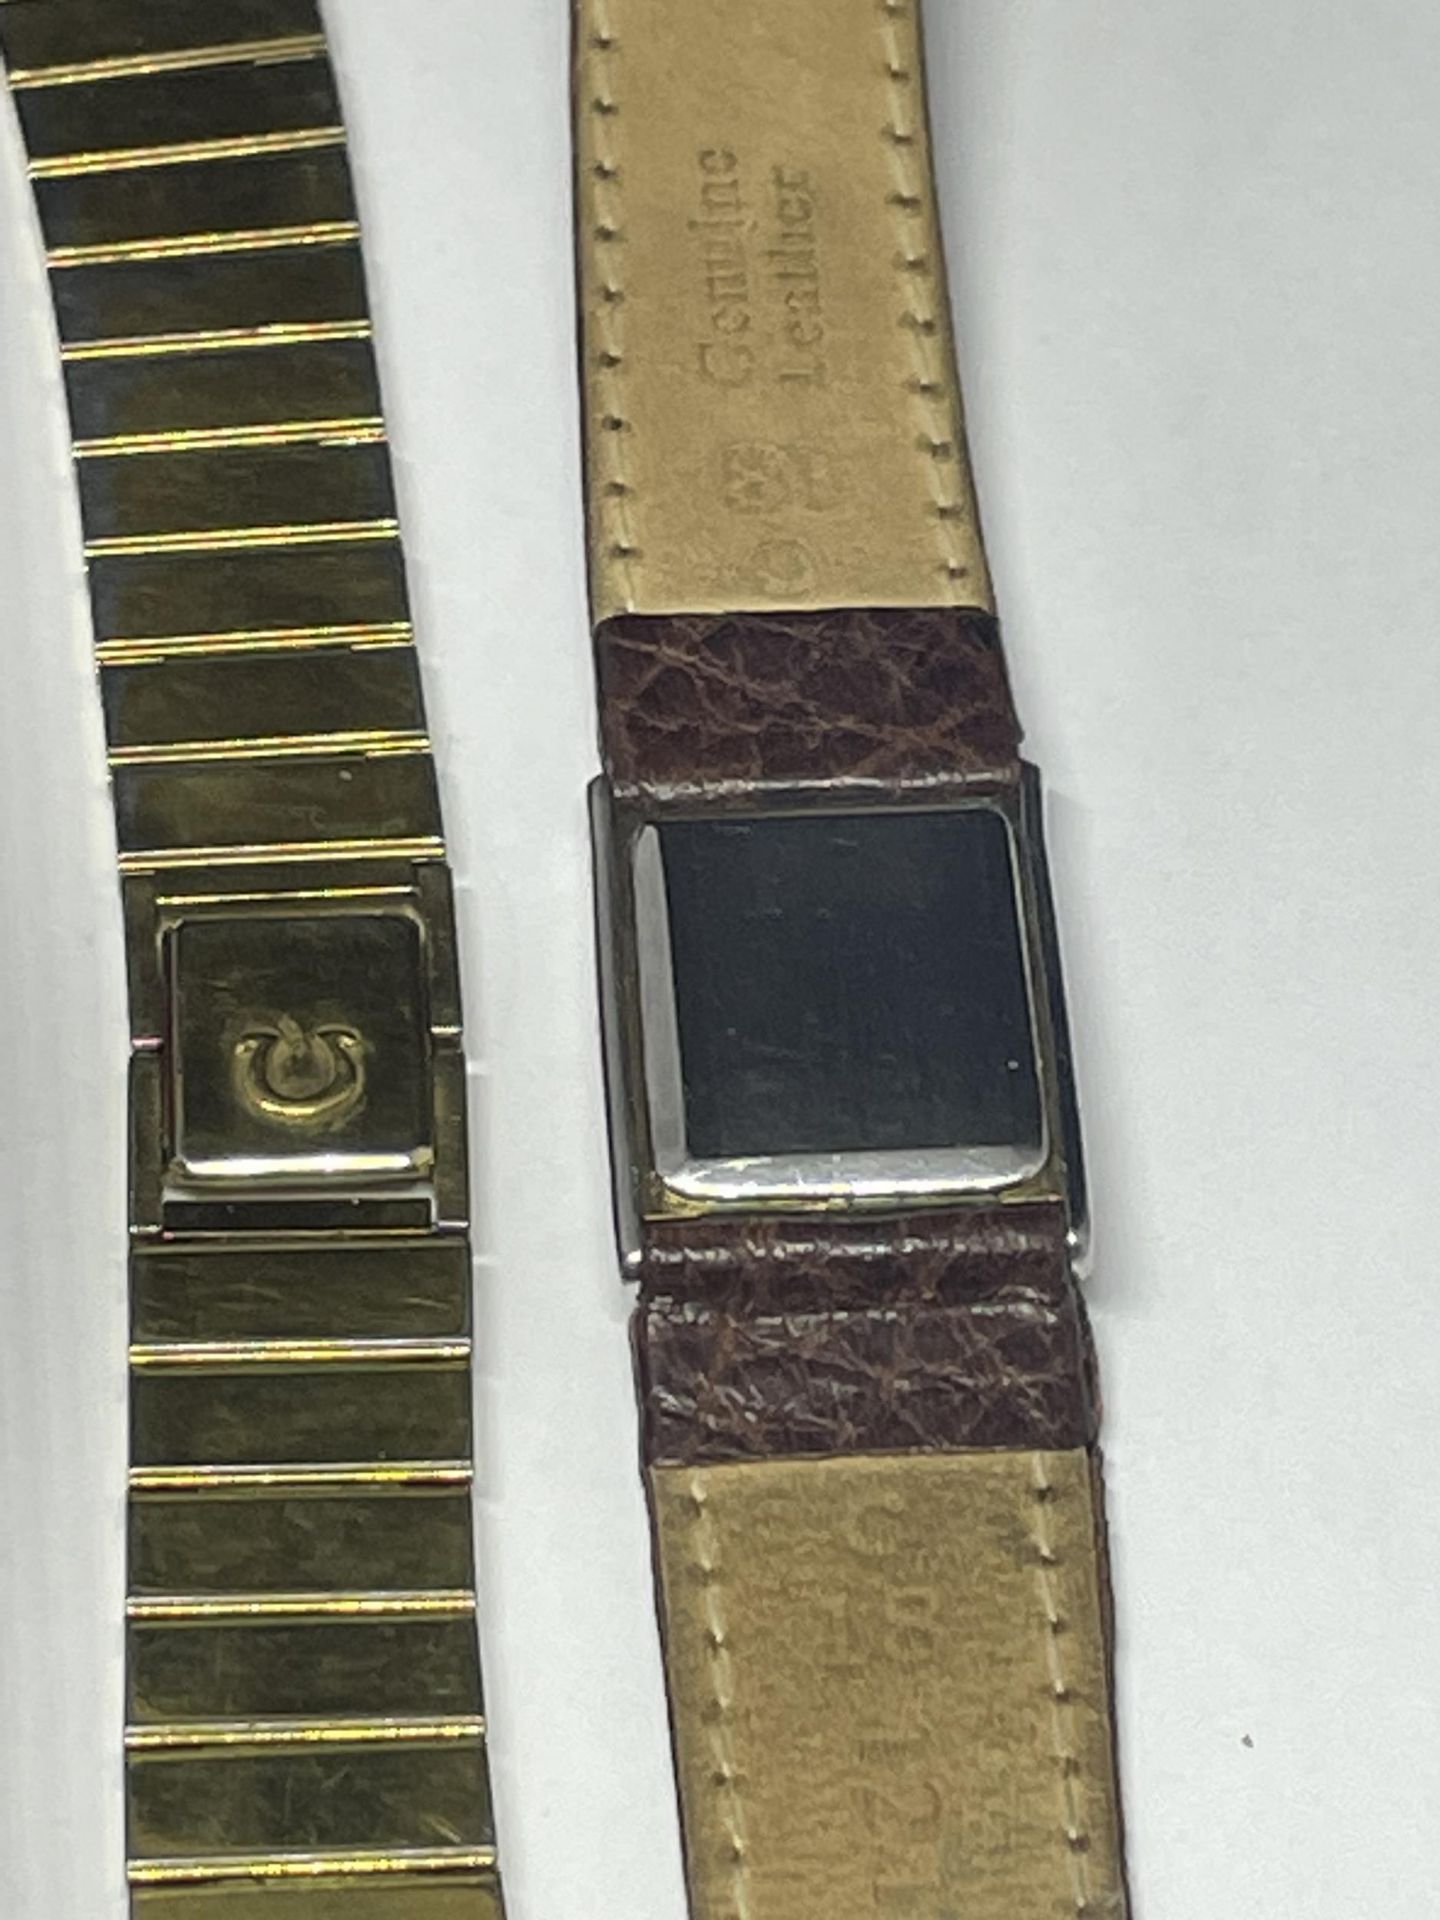 A RARE VINTAGE OMEGA DE VILLE 'OPERA' SLIM UNISEX DRESS WATCH WITH BOX, REF 191.0186, SEEN WORKING - Image 4 of 5